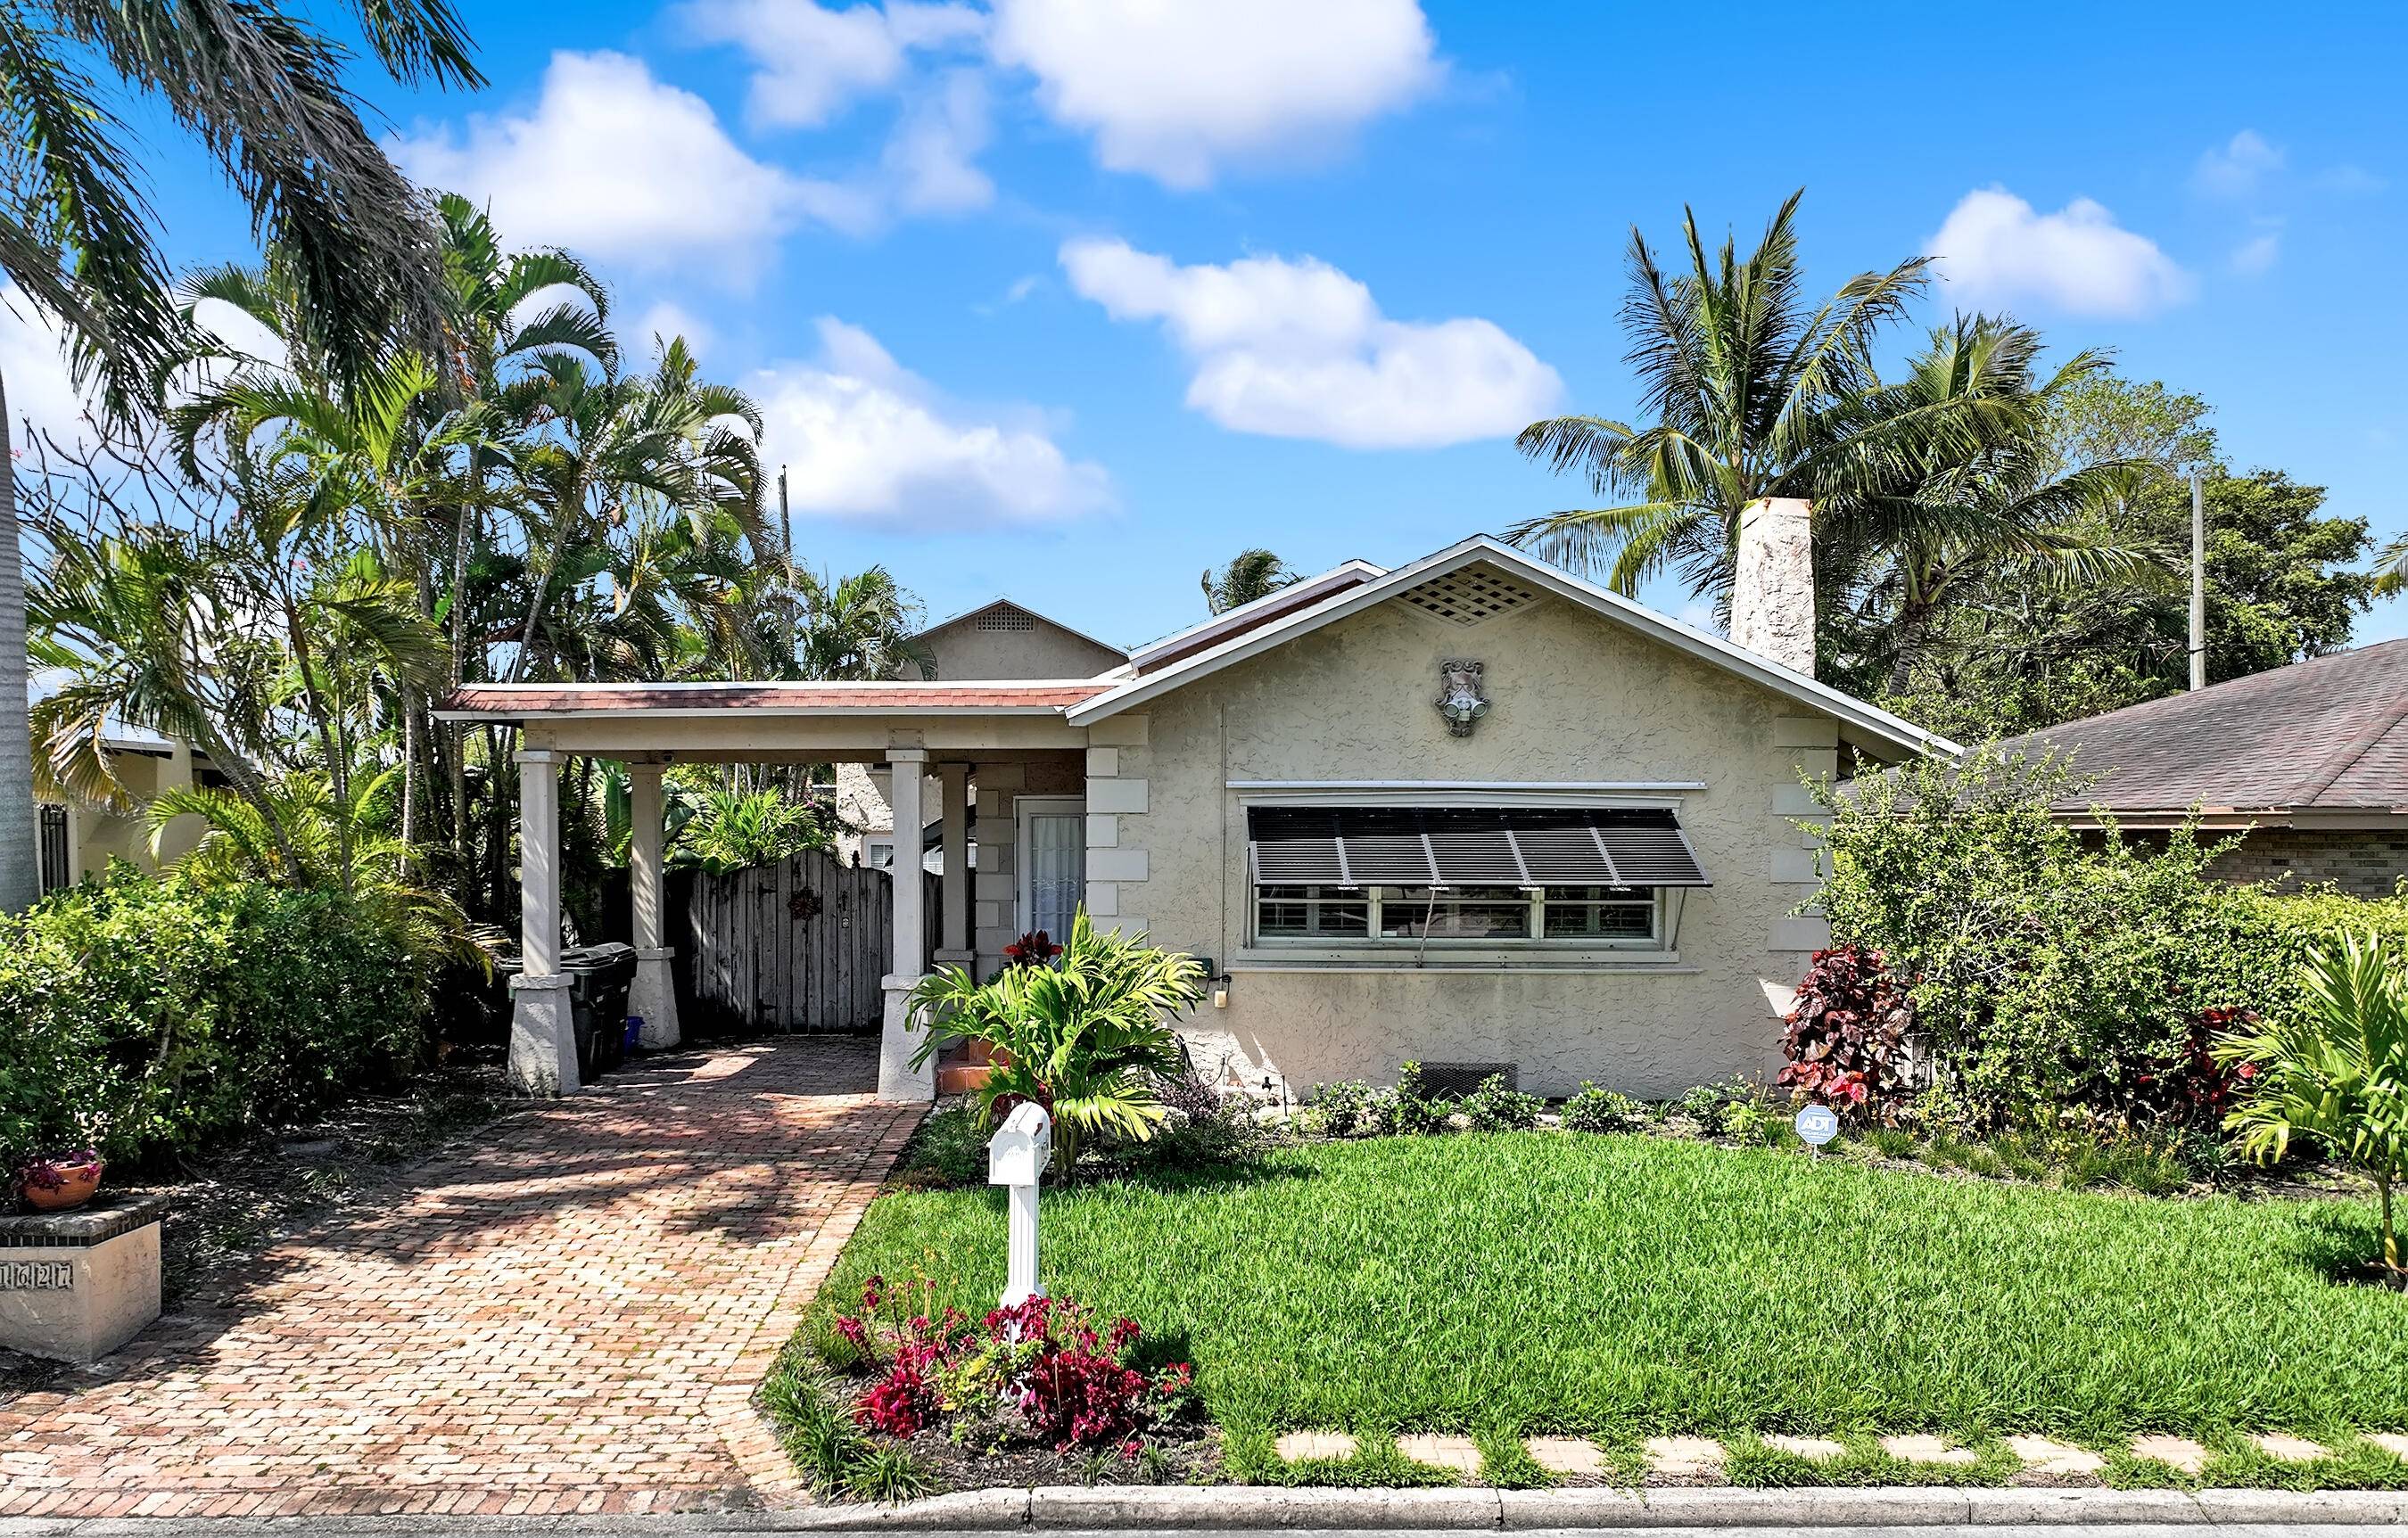 Charming 1925 home ! Mizner inspired architecture surrounds this coastal modern finished property that is an updated 2 bedroom 1 bathroom main home with a 1 1 upstairs apartment in ...